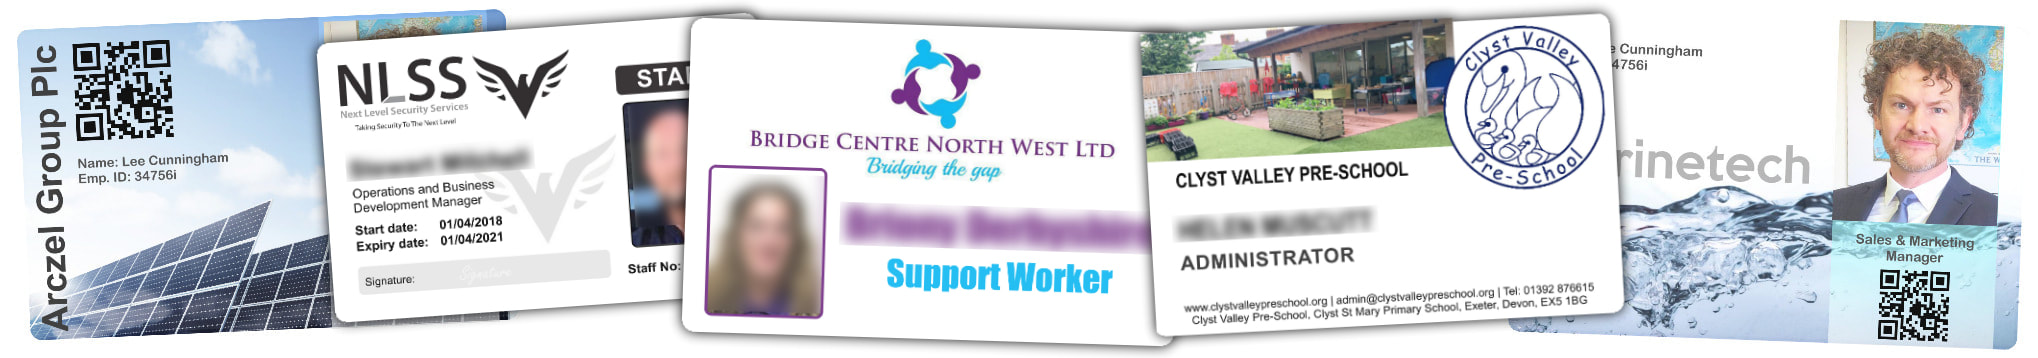 Bolton examples of staff photo ID cards | samples of employee Identity card printing | Workers ID cards printed in Lancashire